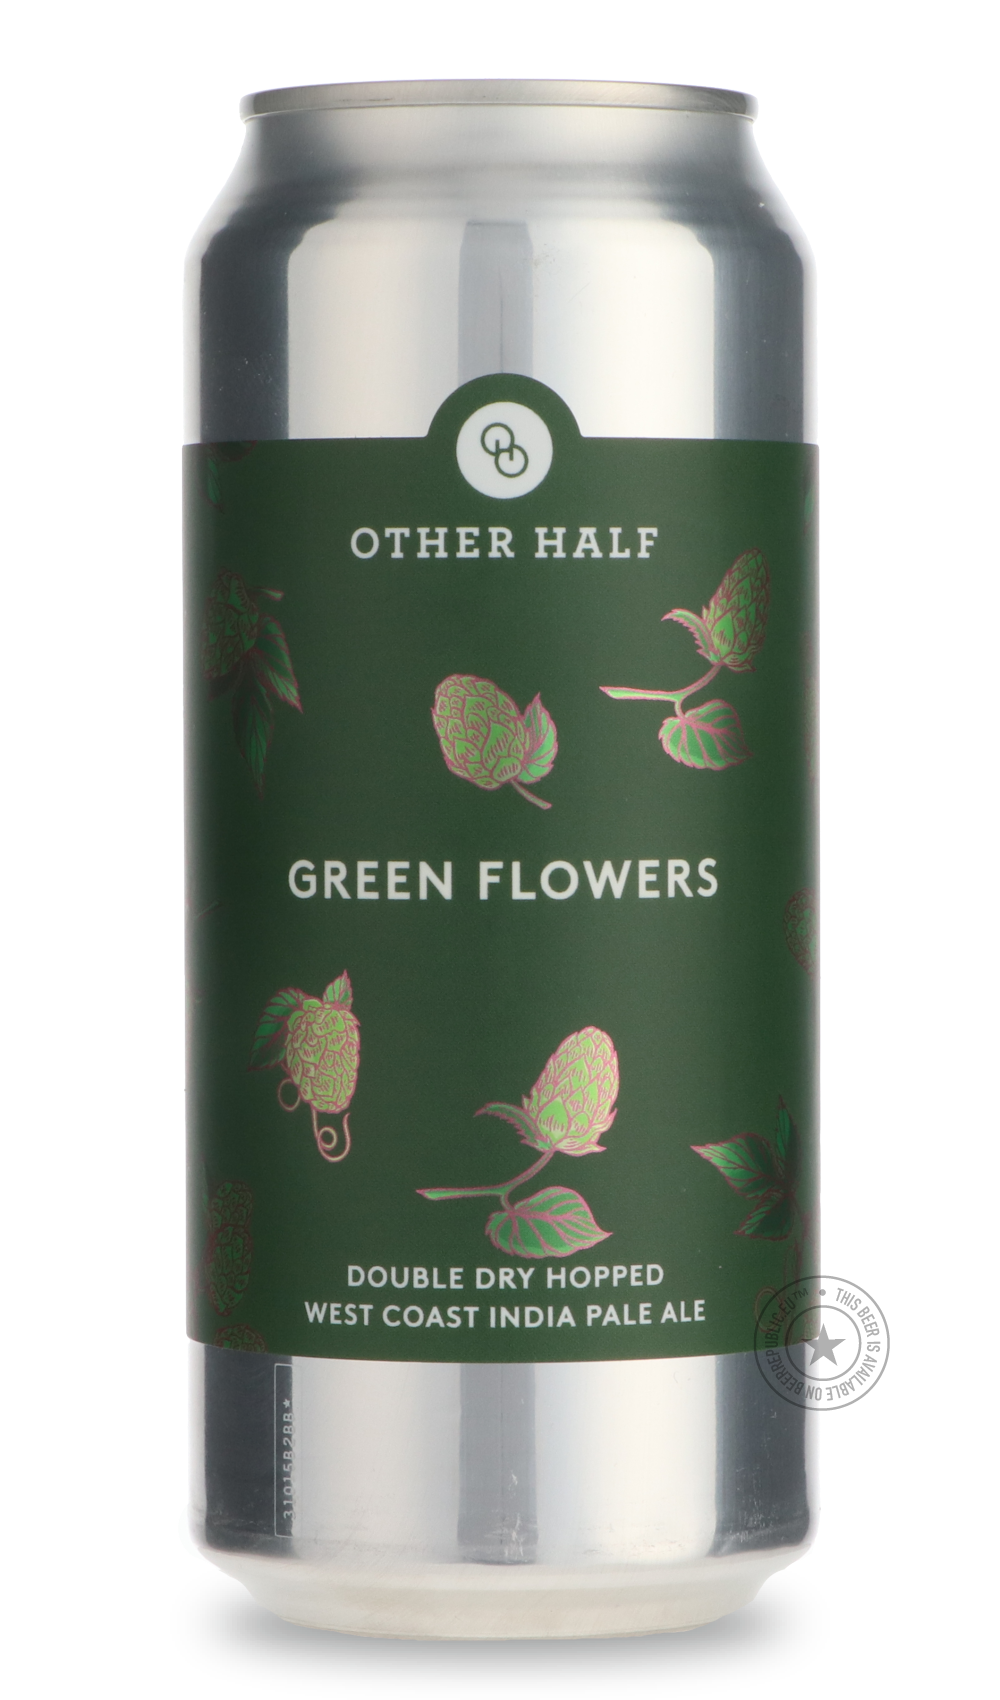 -Other Half- Green Flowers-IPA- Only @ Beer Republic - The best online beer store for American & Canadian craft beer - Buy beer online from the USA and Canada - Bier online kopen - Amerikaans bier kopen - Craft beer store - Craft beer kopen - Amerikanisch bier kaufen - Bier online kaufen - Acheter biere online - IPA - Stout - Porter - New England IPA - Hazy IPA - Imperial Stout - Barrel Aged - Barrel Aged Imperial Stout - Brown - Dark beer - Blond - Blonde - Pilsner - Lager - Wheat - Weizen - Amber - Barley